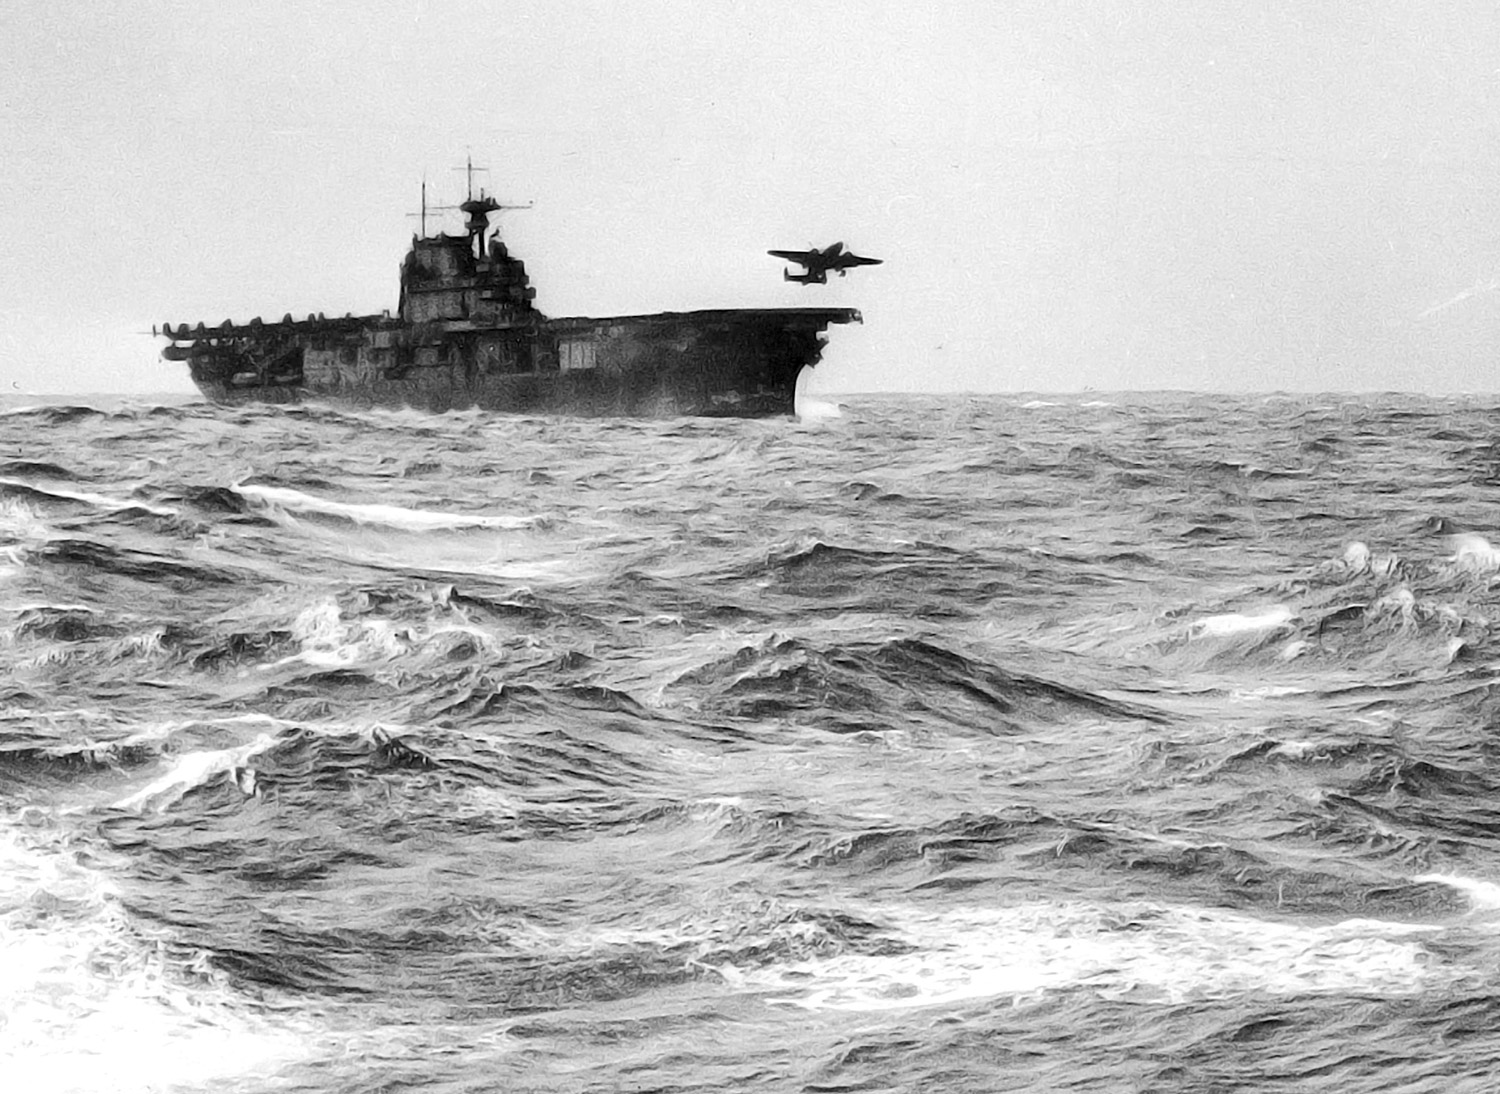 A B-25 Mitchell taking off from the USS Hornet for the Tokyo Raid, April 18, 1942.